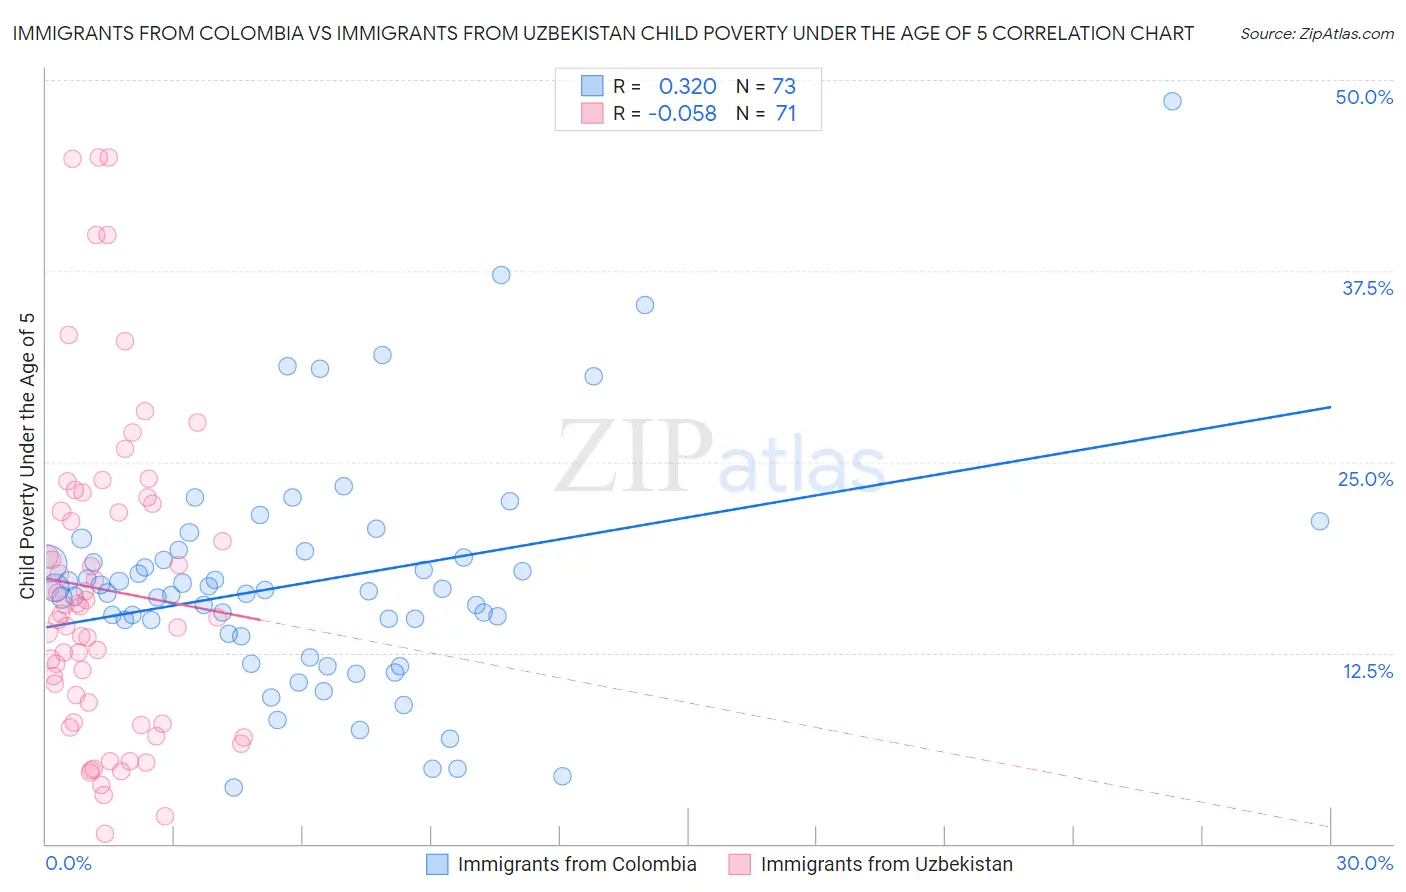 Immigrants from Colombia vs Immigrants from Uzbekistan Child Poverty Under the Age of 5